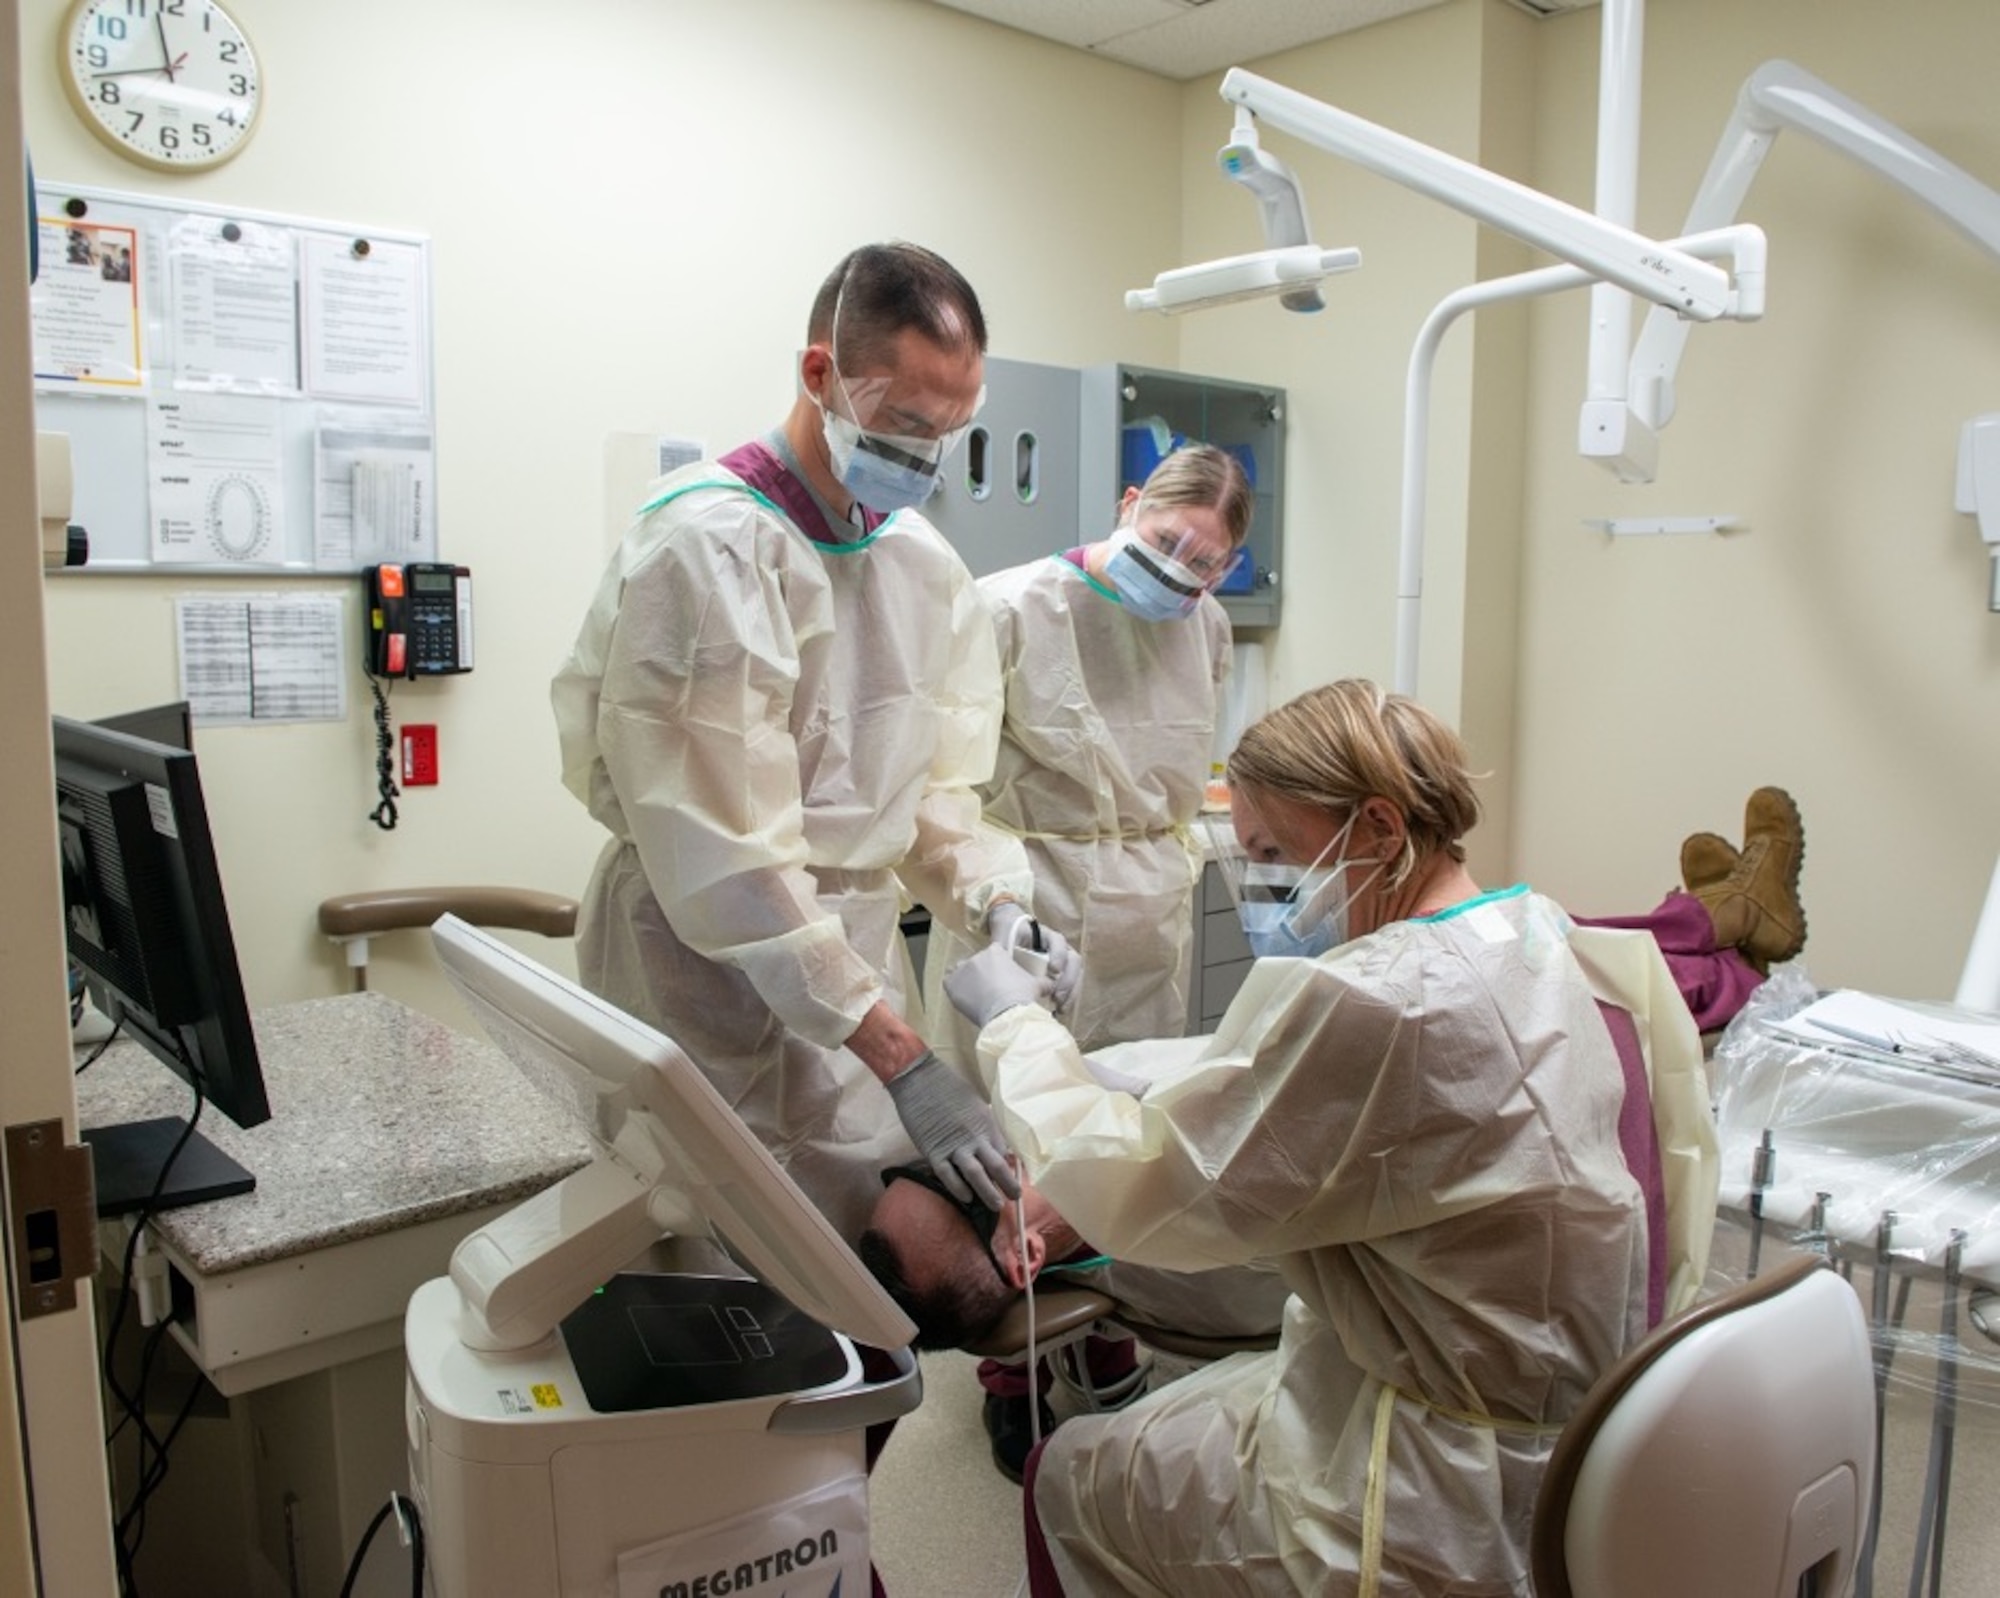 U.S. Air Force Senior Airman Regan Bassett, left, a dental technician assigned to the 673d Dental Squadron, guides a dental scan on U.S. Air Force Chief Master Sgt. Lee Mills, Joint Base Elmendorf-Richardson and 673d Air Base Wing command chief during a 673d Dental Squadron immersion tour at Joint Base Elmendorf-Richardson, Alaska, March 2, 2021.